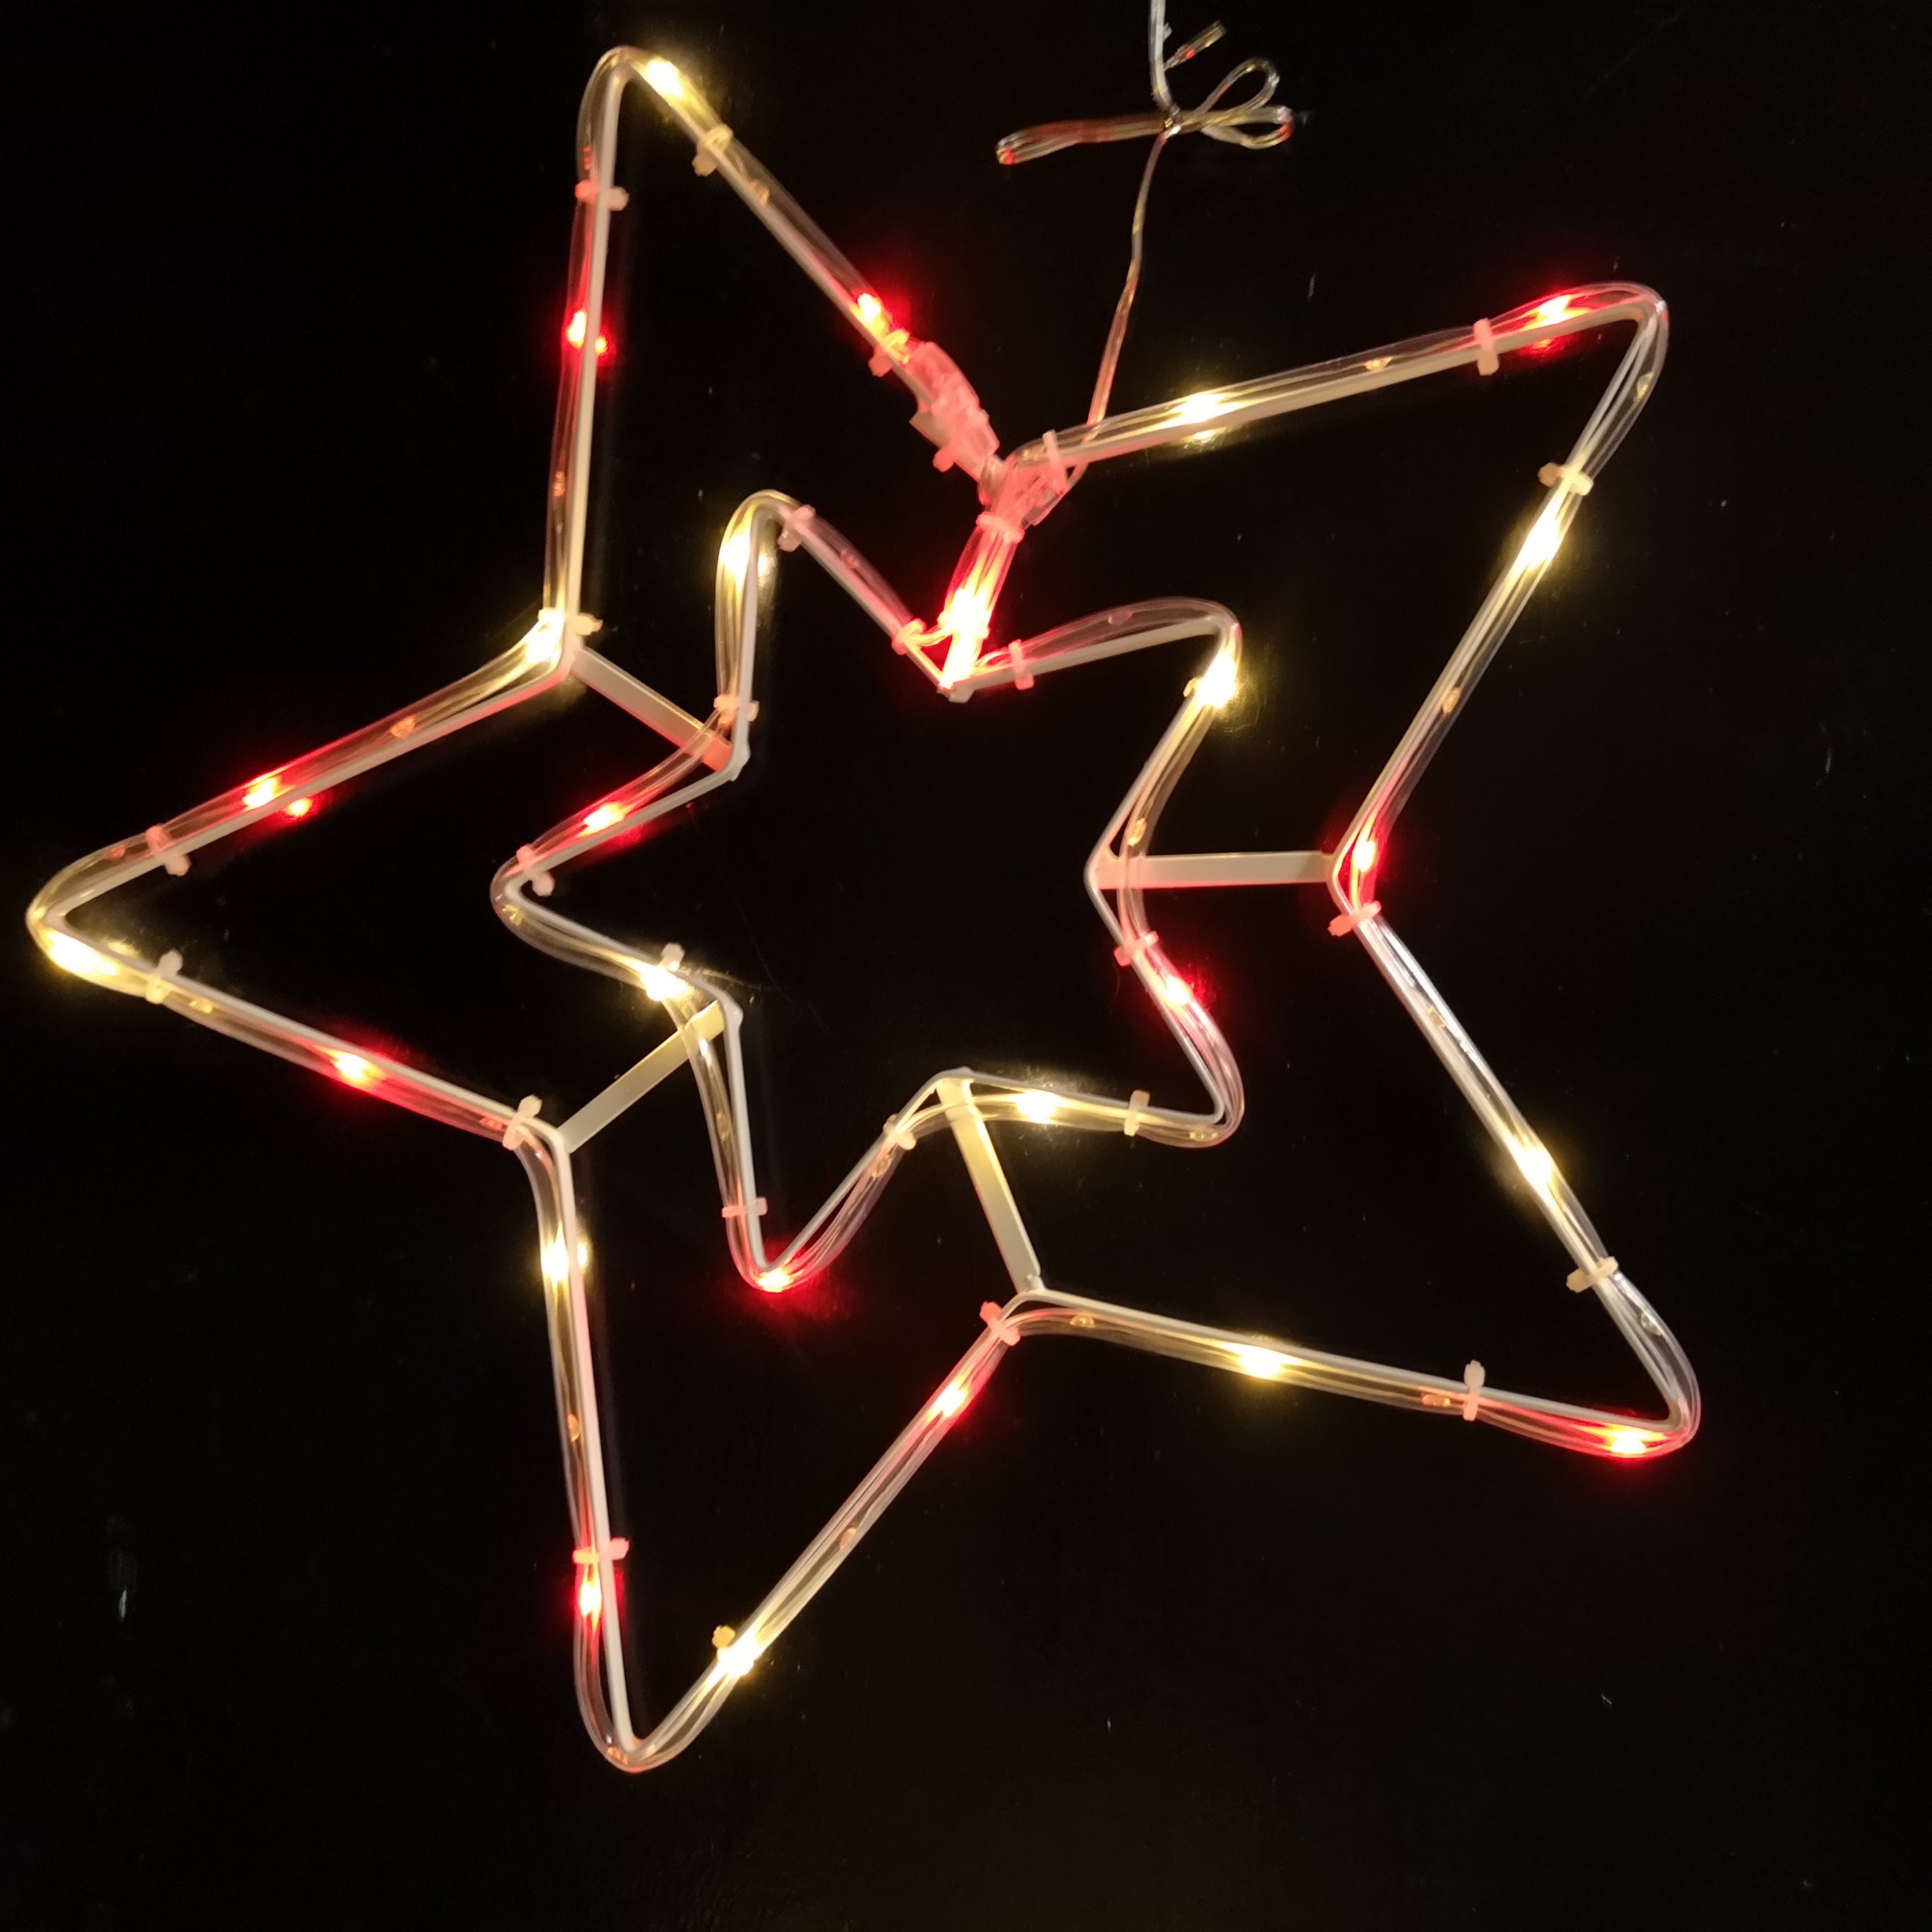 40cm Battery Operated Multi Colour LED Star Light Christmas Decorations